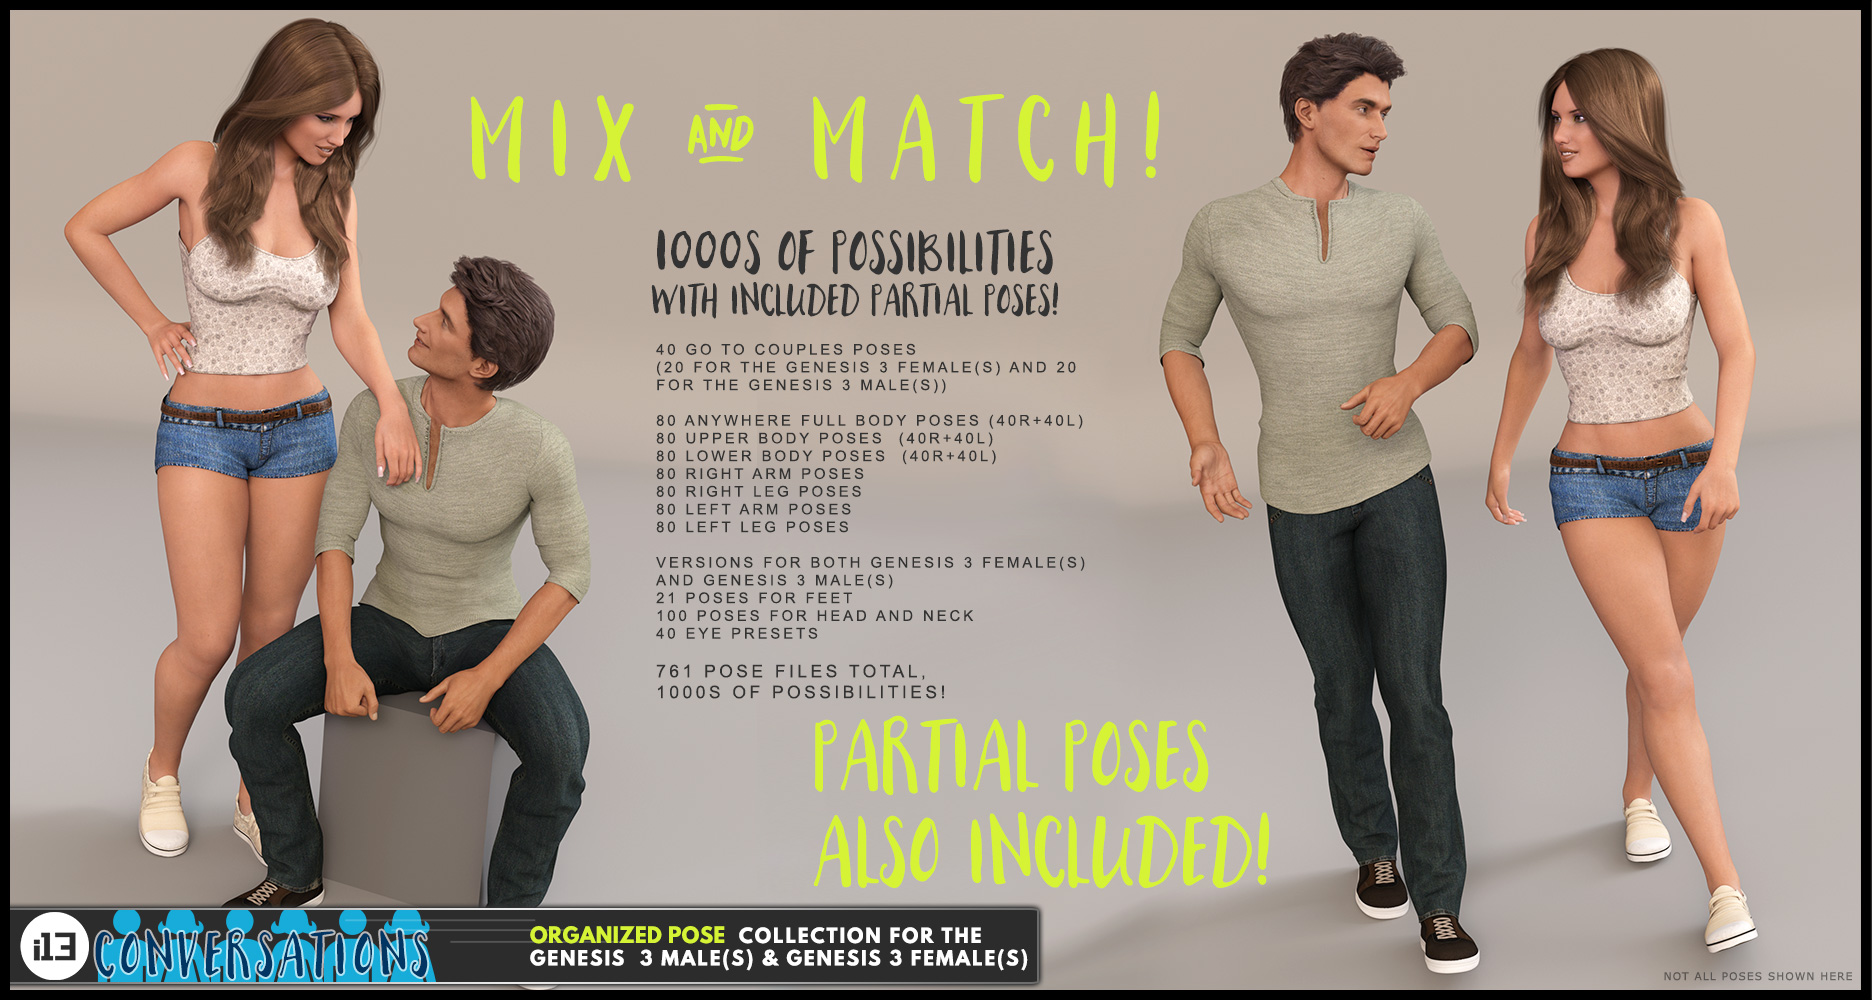 i13 Conversations Pose Collection for the Genesis 3 Male(s) and Genesis 3 Female(s) by: ironman13, 3D Models by Daz 3D